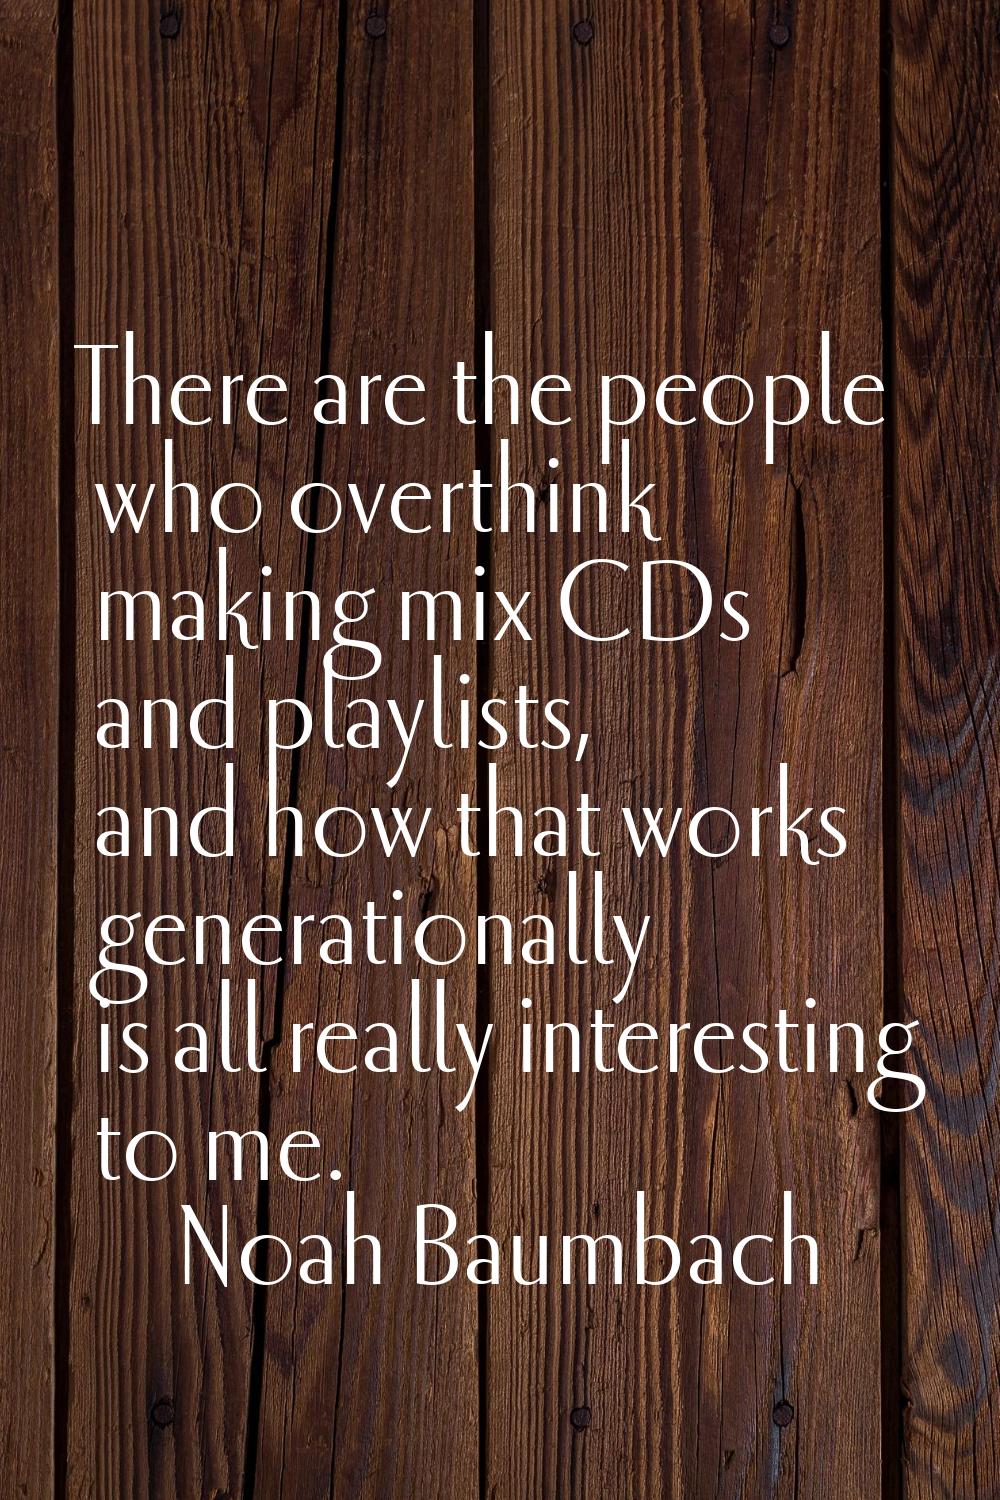 There are the people who overthink making mix CDs and playlists, and how that works generationally 